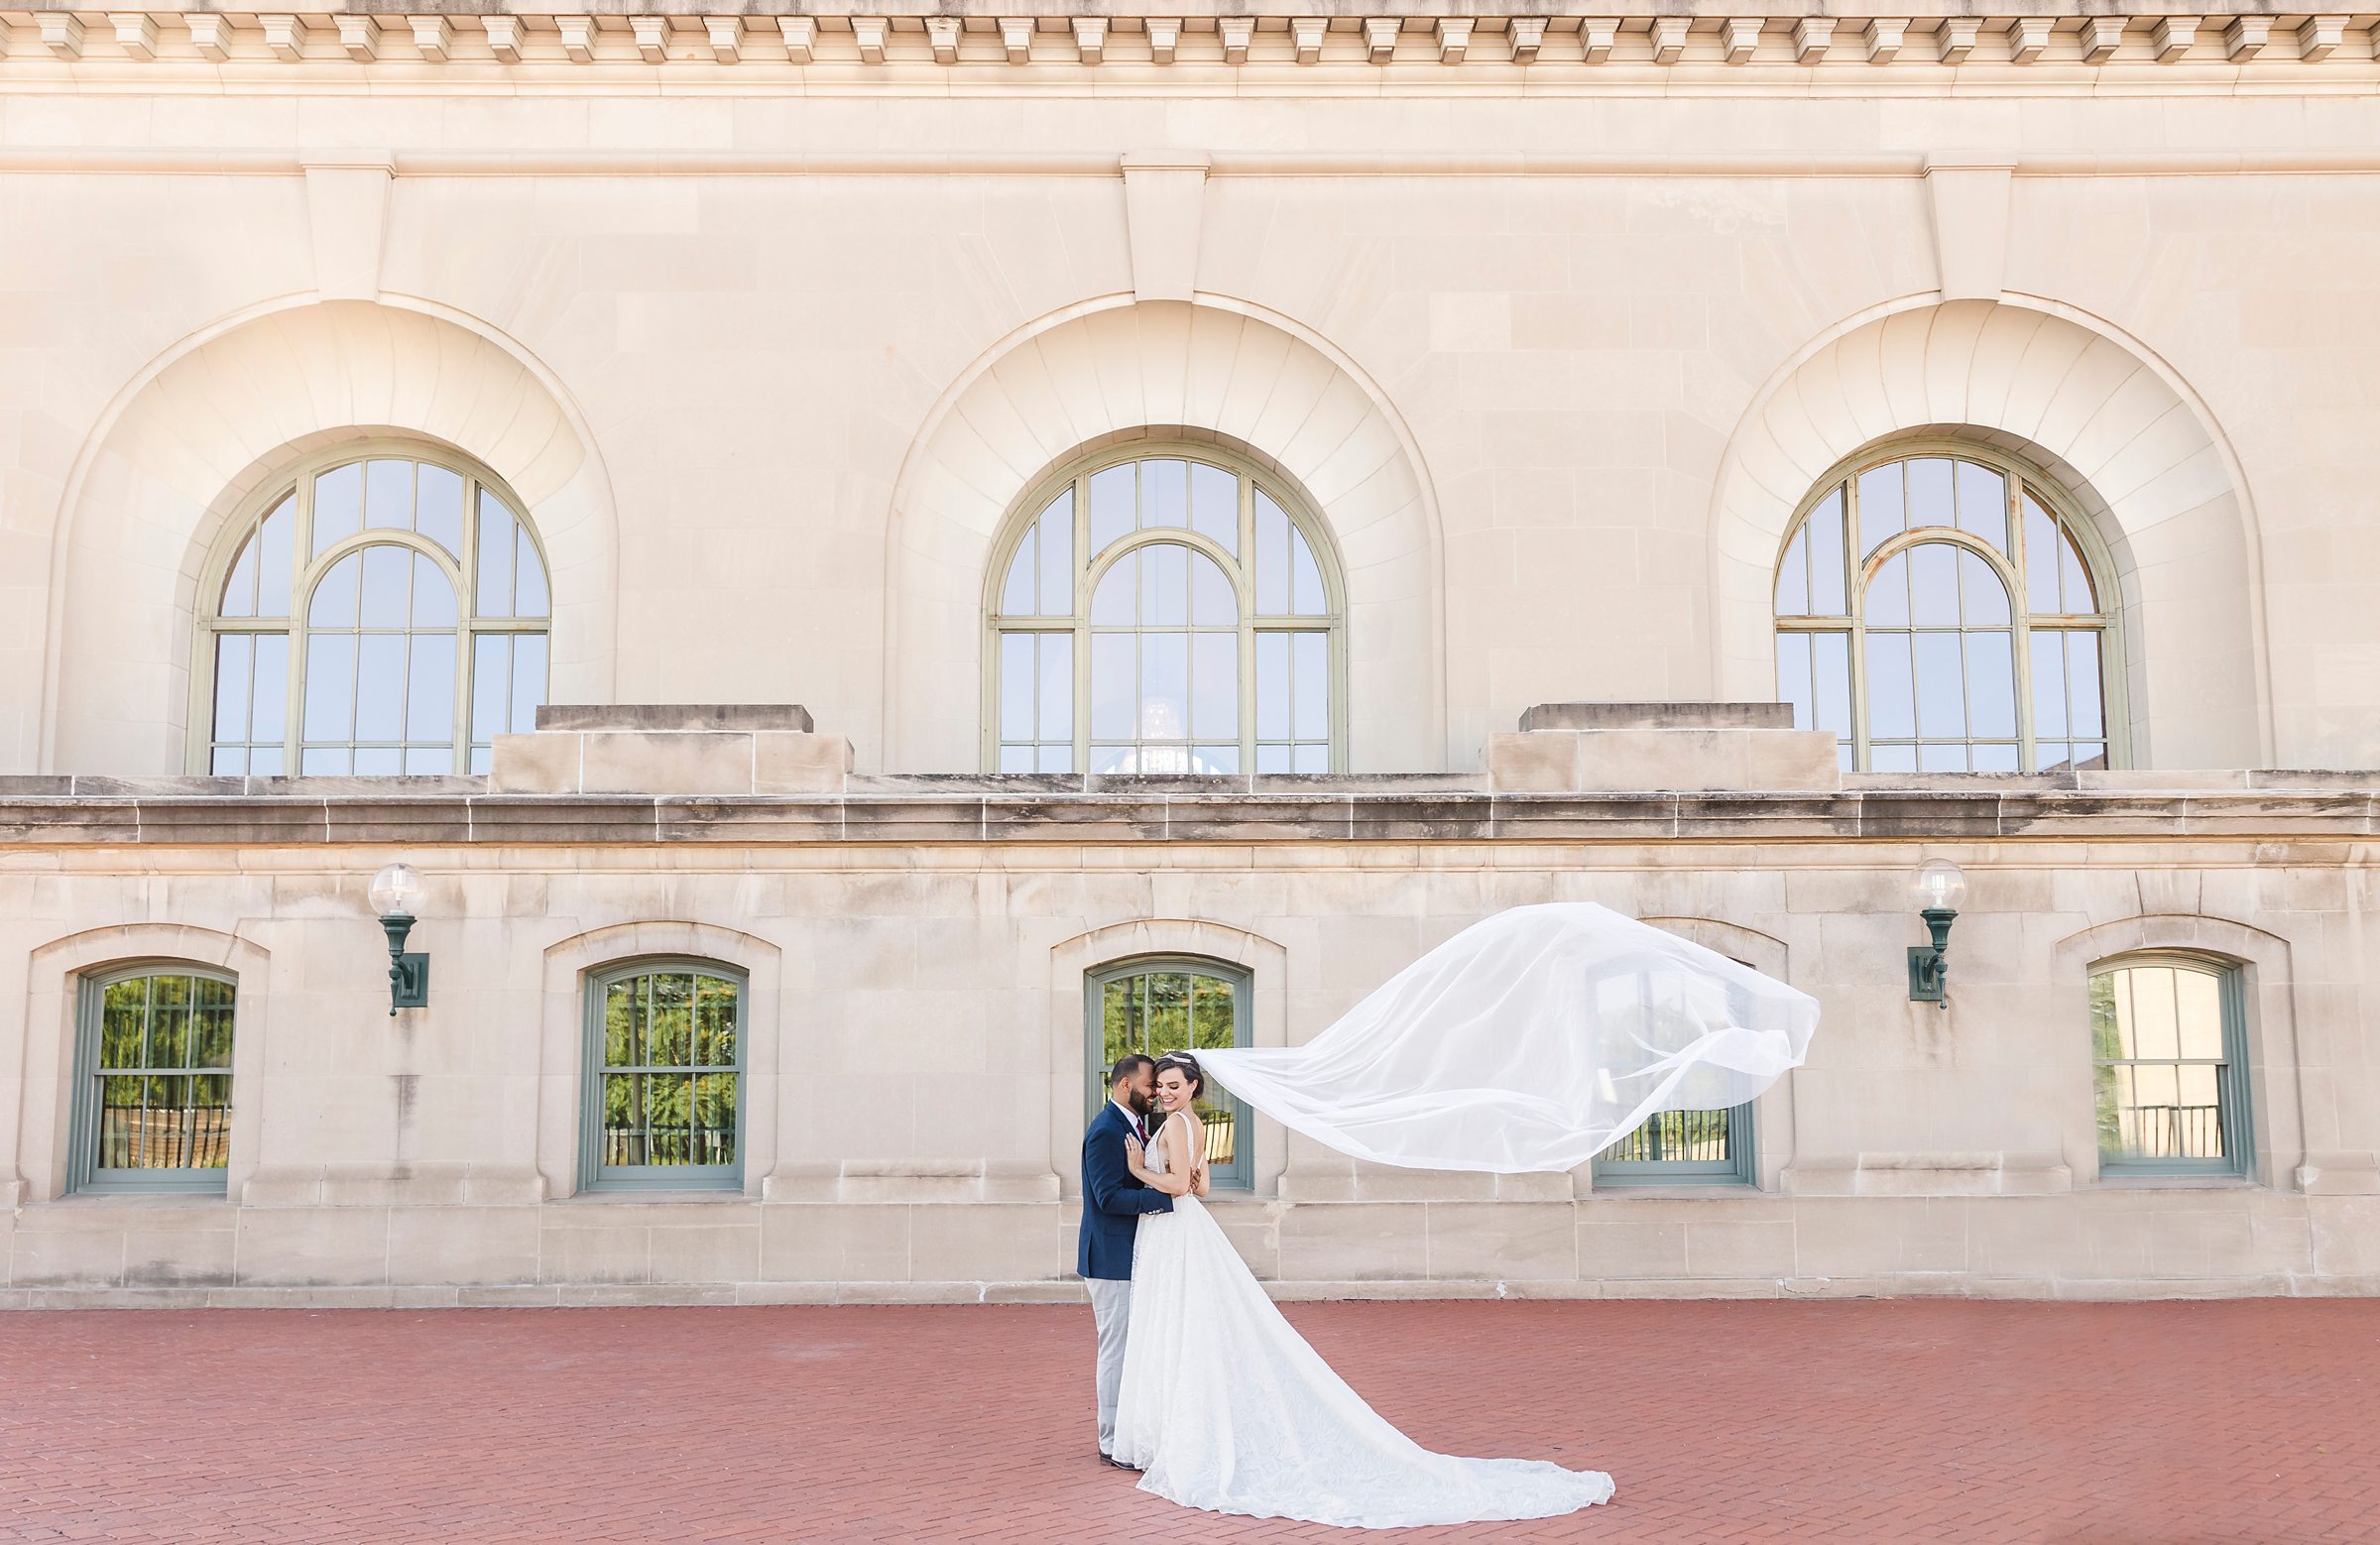 Couple embrace during their wedding at the Union Station in Joliet, Illinois.